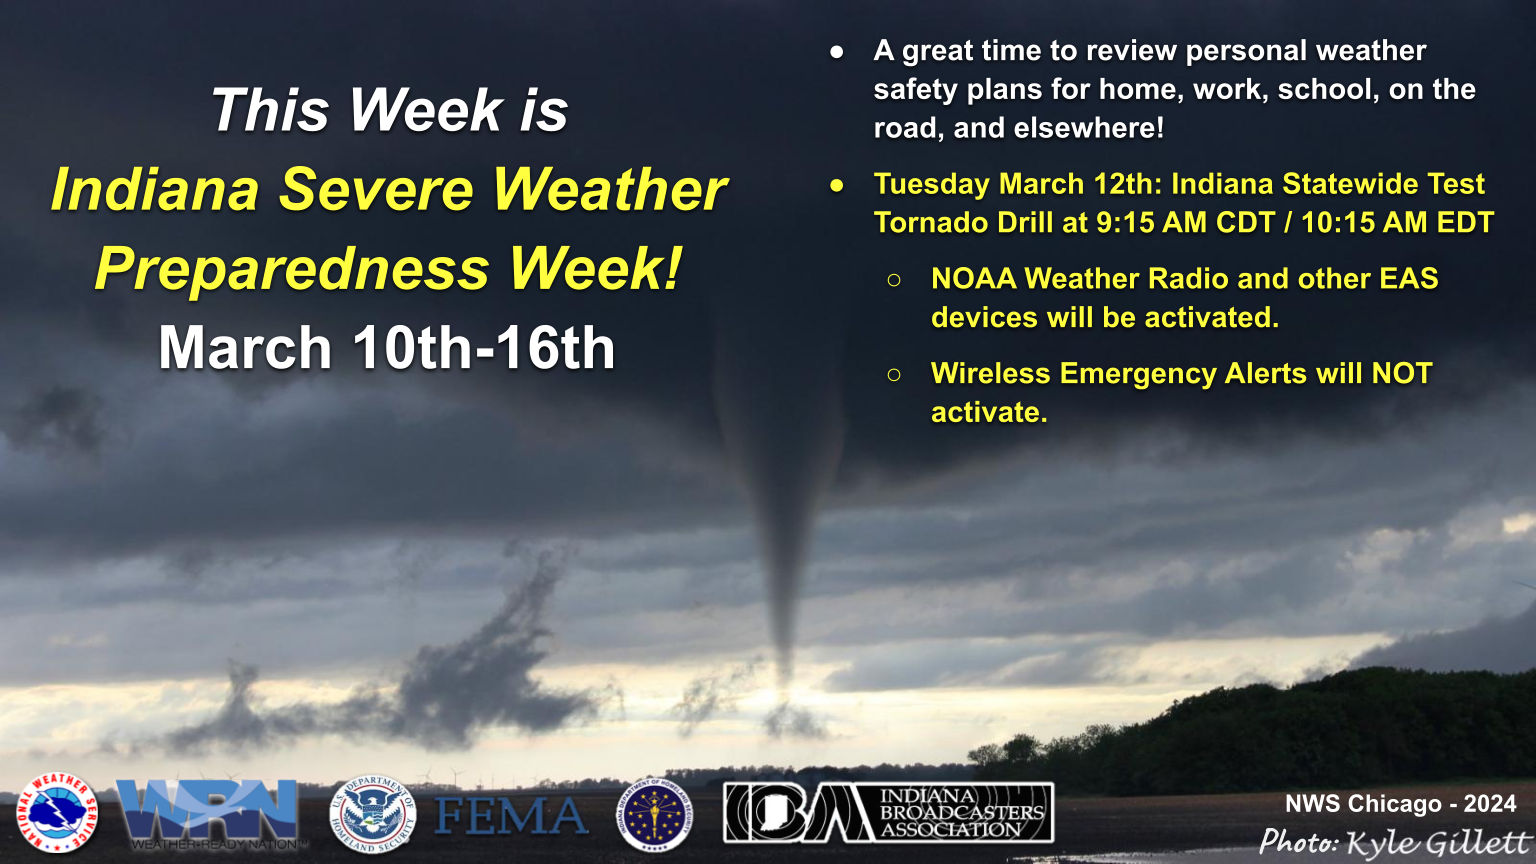 Headline: This Week is Indiana Severe Weather Preparedness Week! March 10th-March 16th. A great time to review personal weather safety plans for home, work, school, on the road, and elsewhere! Tuesday March 12th: Indiana Statewide Test Tornado Drill at 9:15 AM CDT / 10:15 EDT. NOAA Weather Radio and other EAS devices will be activated. Wireless Emergency Alerts will NOT activate.